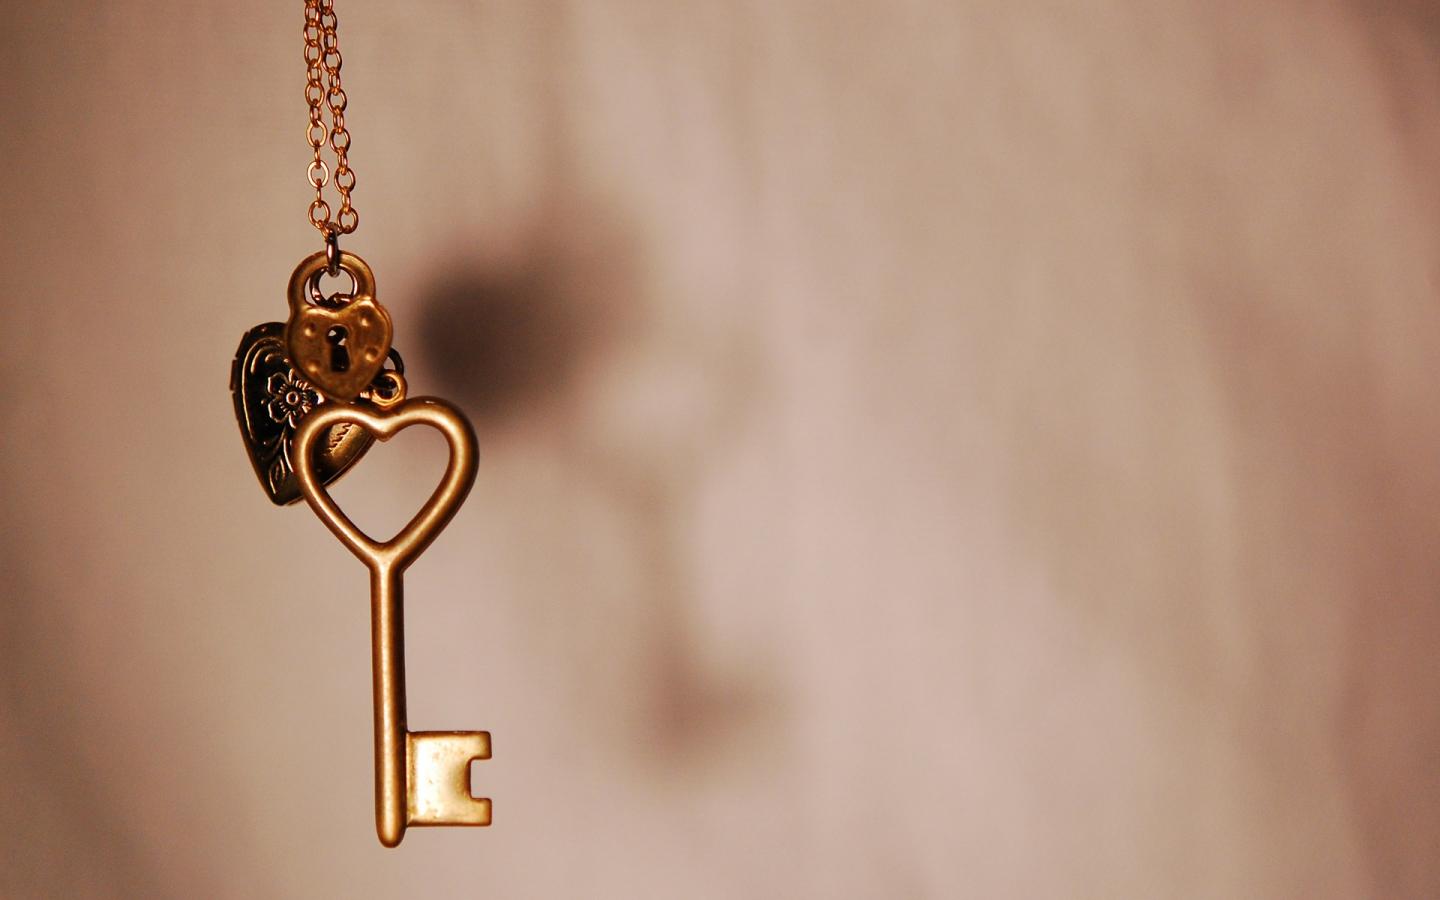 Love image Key HD wallpaper and background photo